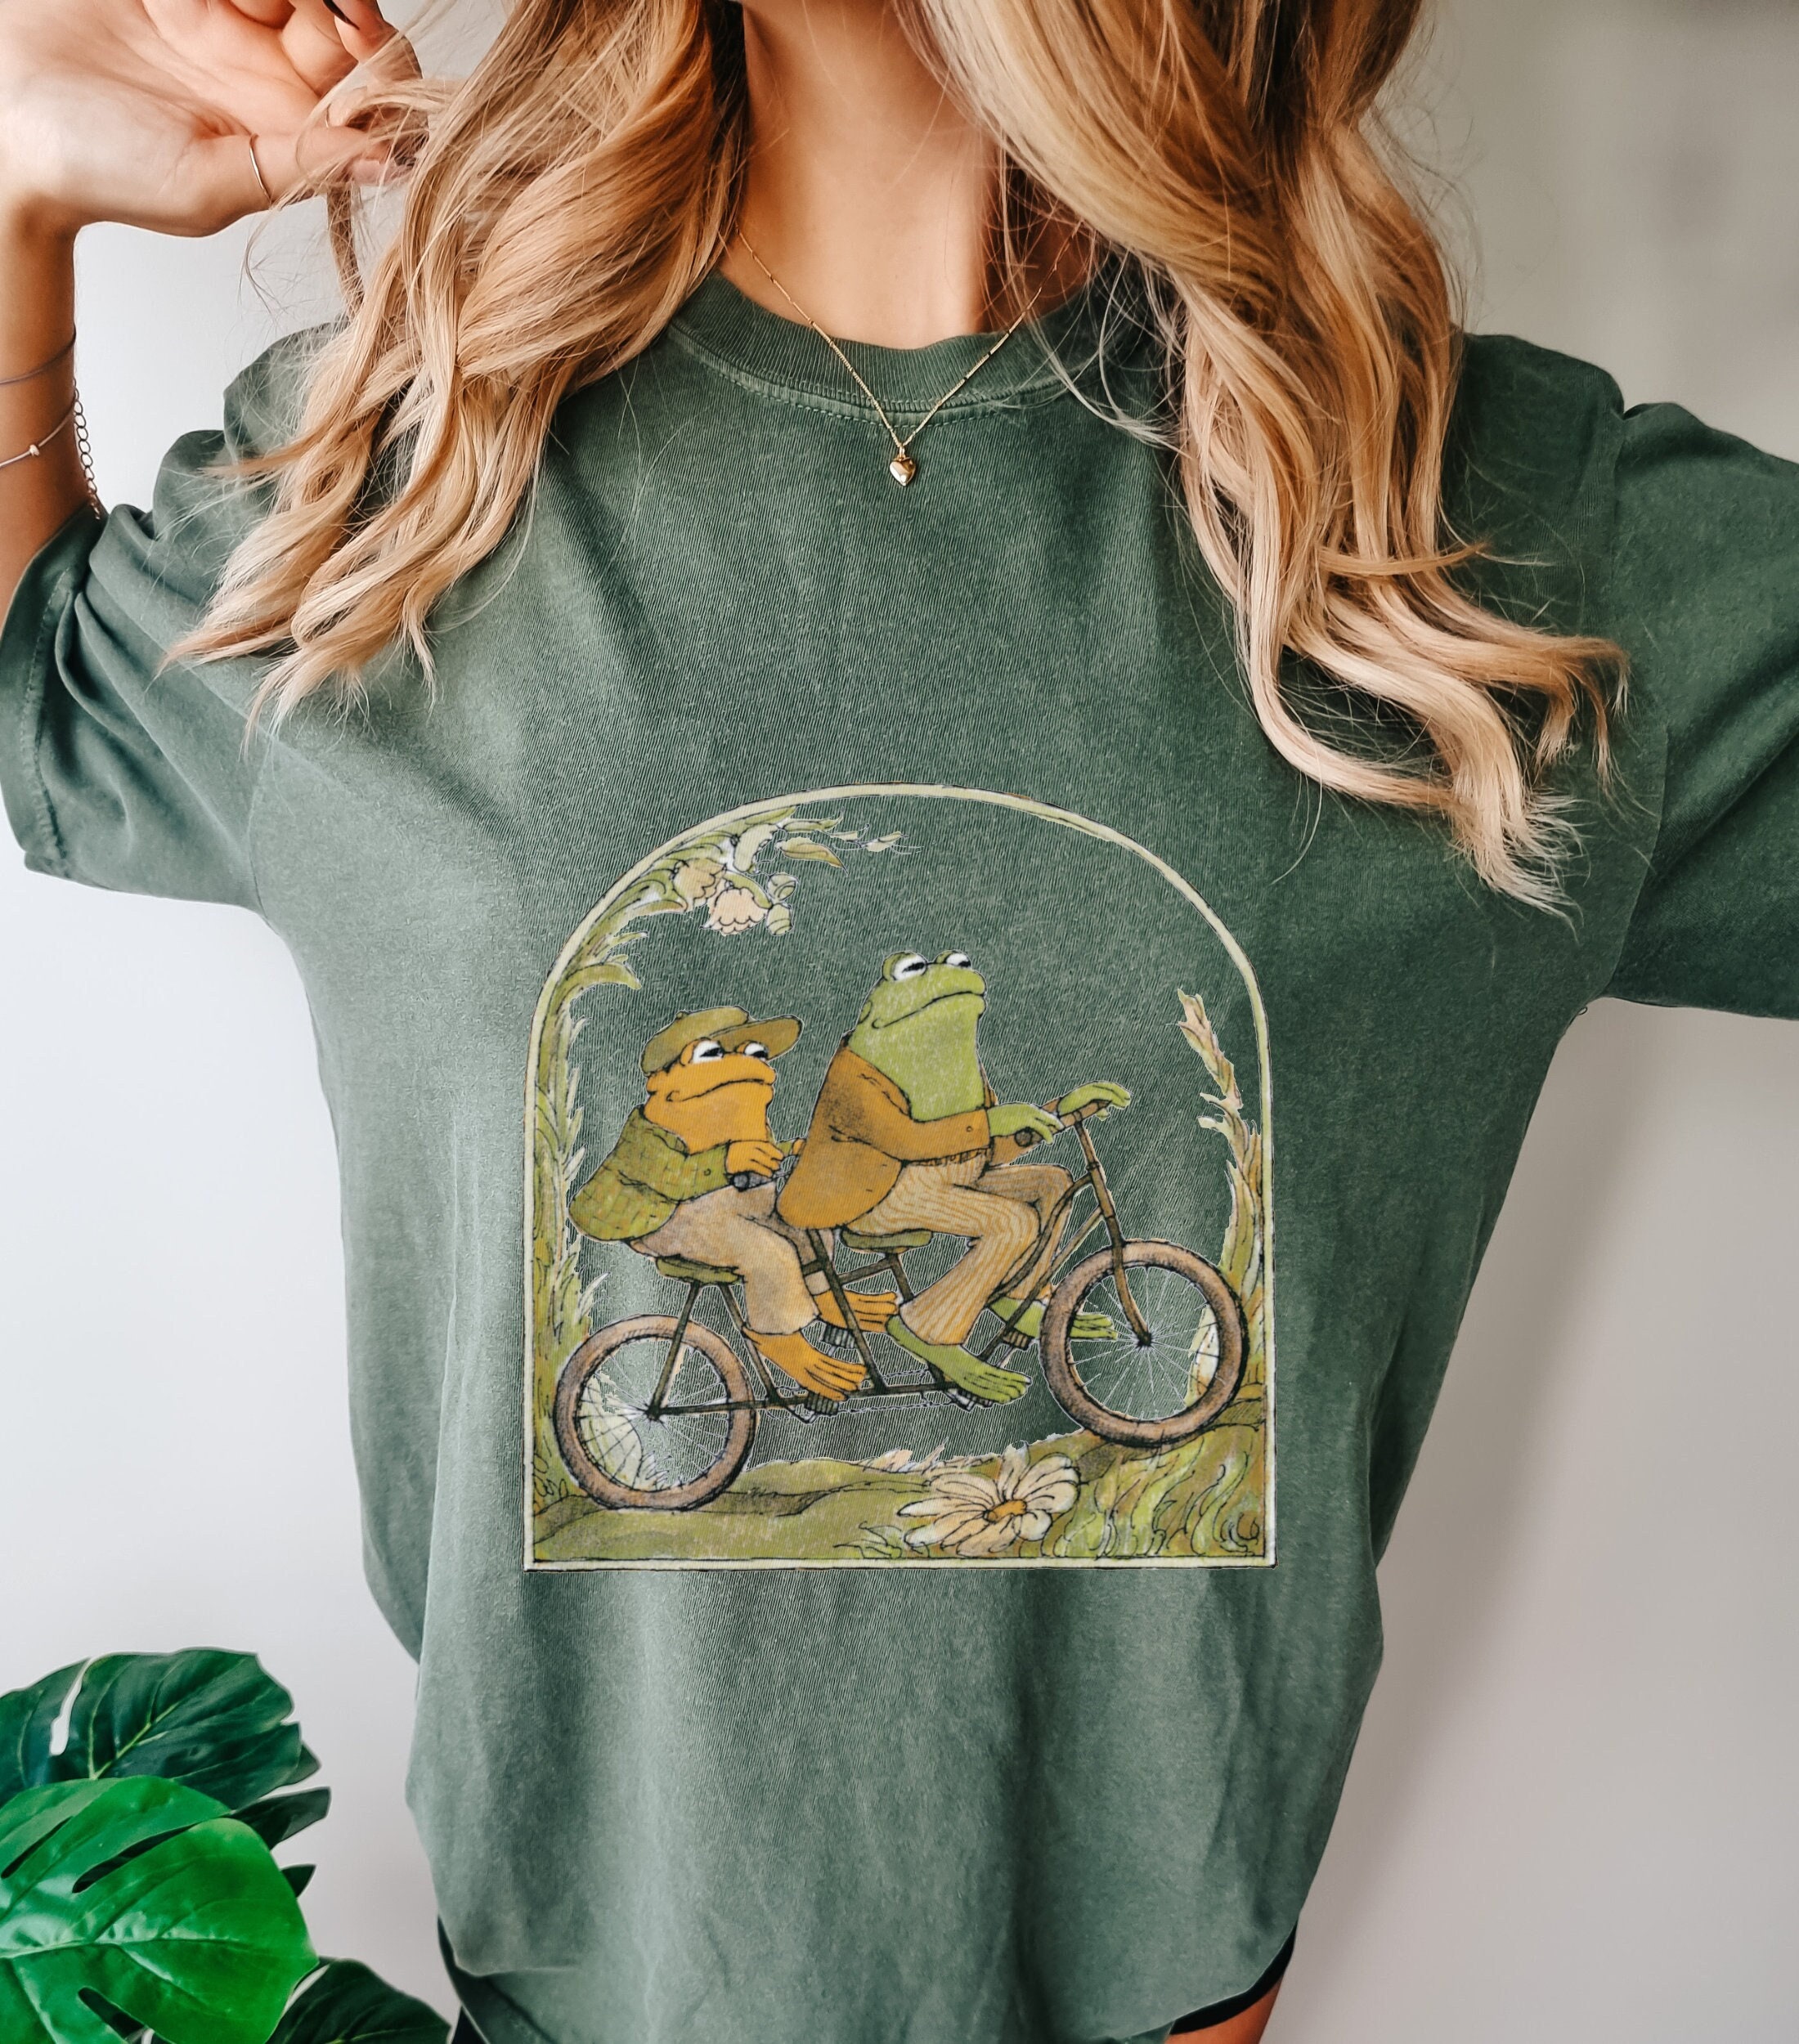 Frog and Toad Shirt-vintage Classic-gifts for Readers-animal Tshirts  Cottagecore Aesthetic Tee Shirts-book Series Shirt 